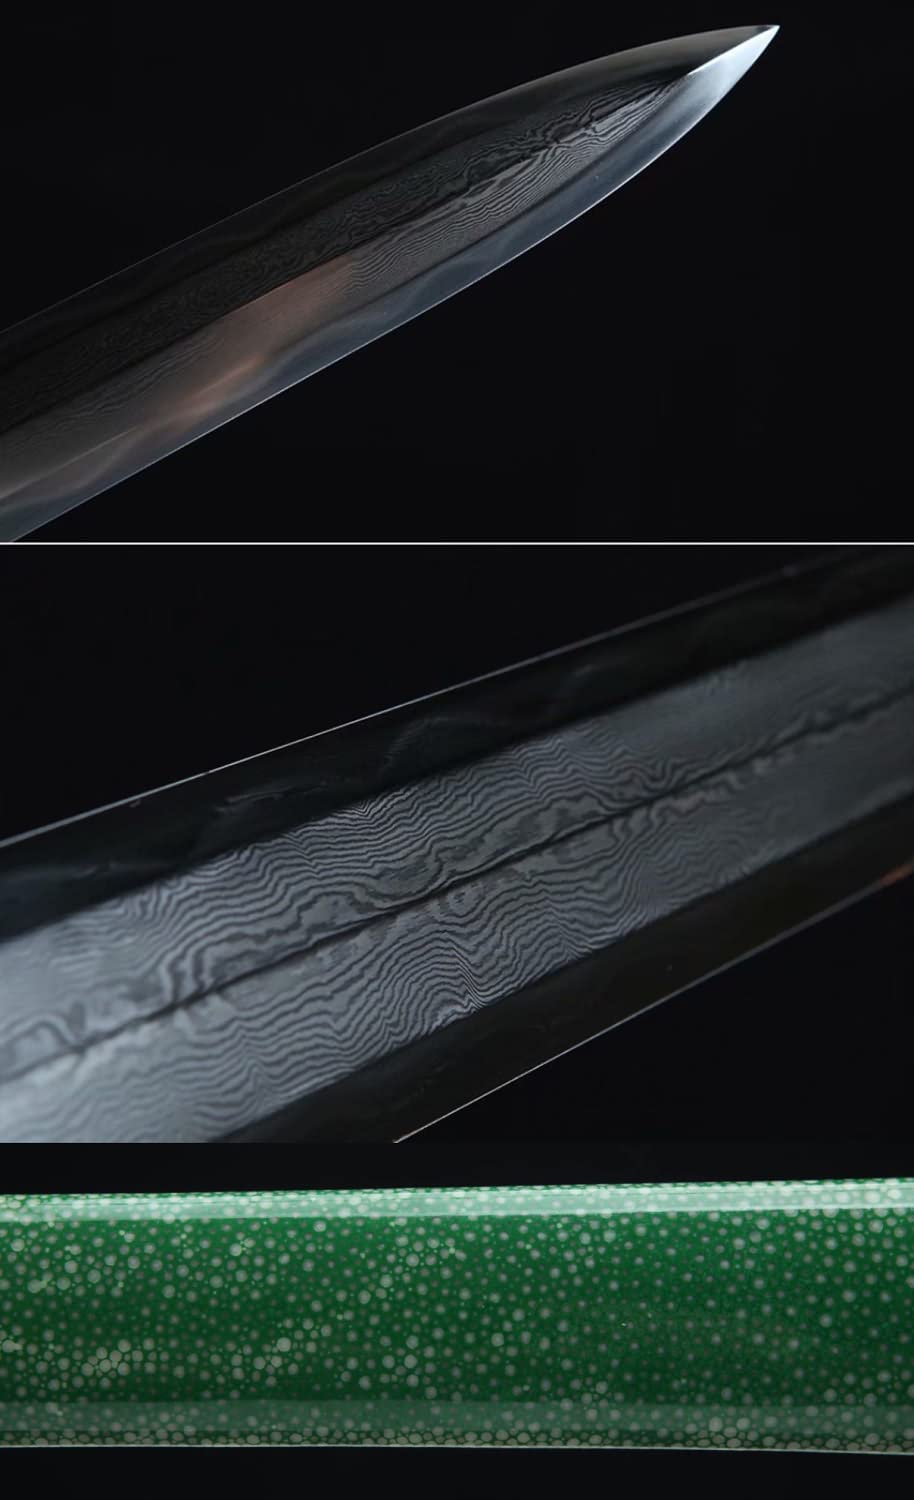 Yongle jian Forged Damascus Steel Blades,Green Skin Scabbard,Brass Fittings,chinese sword